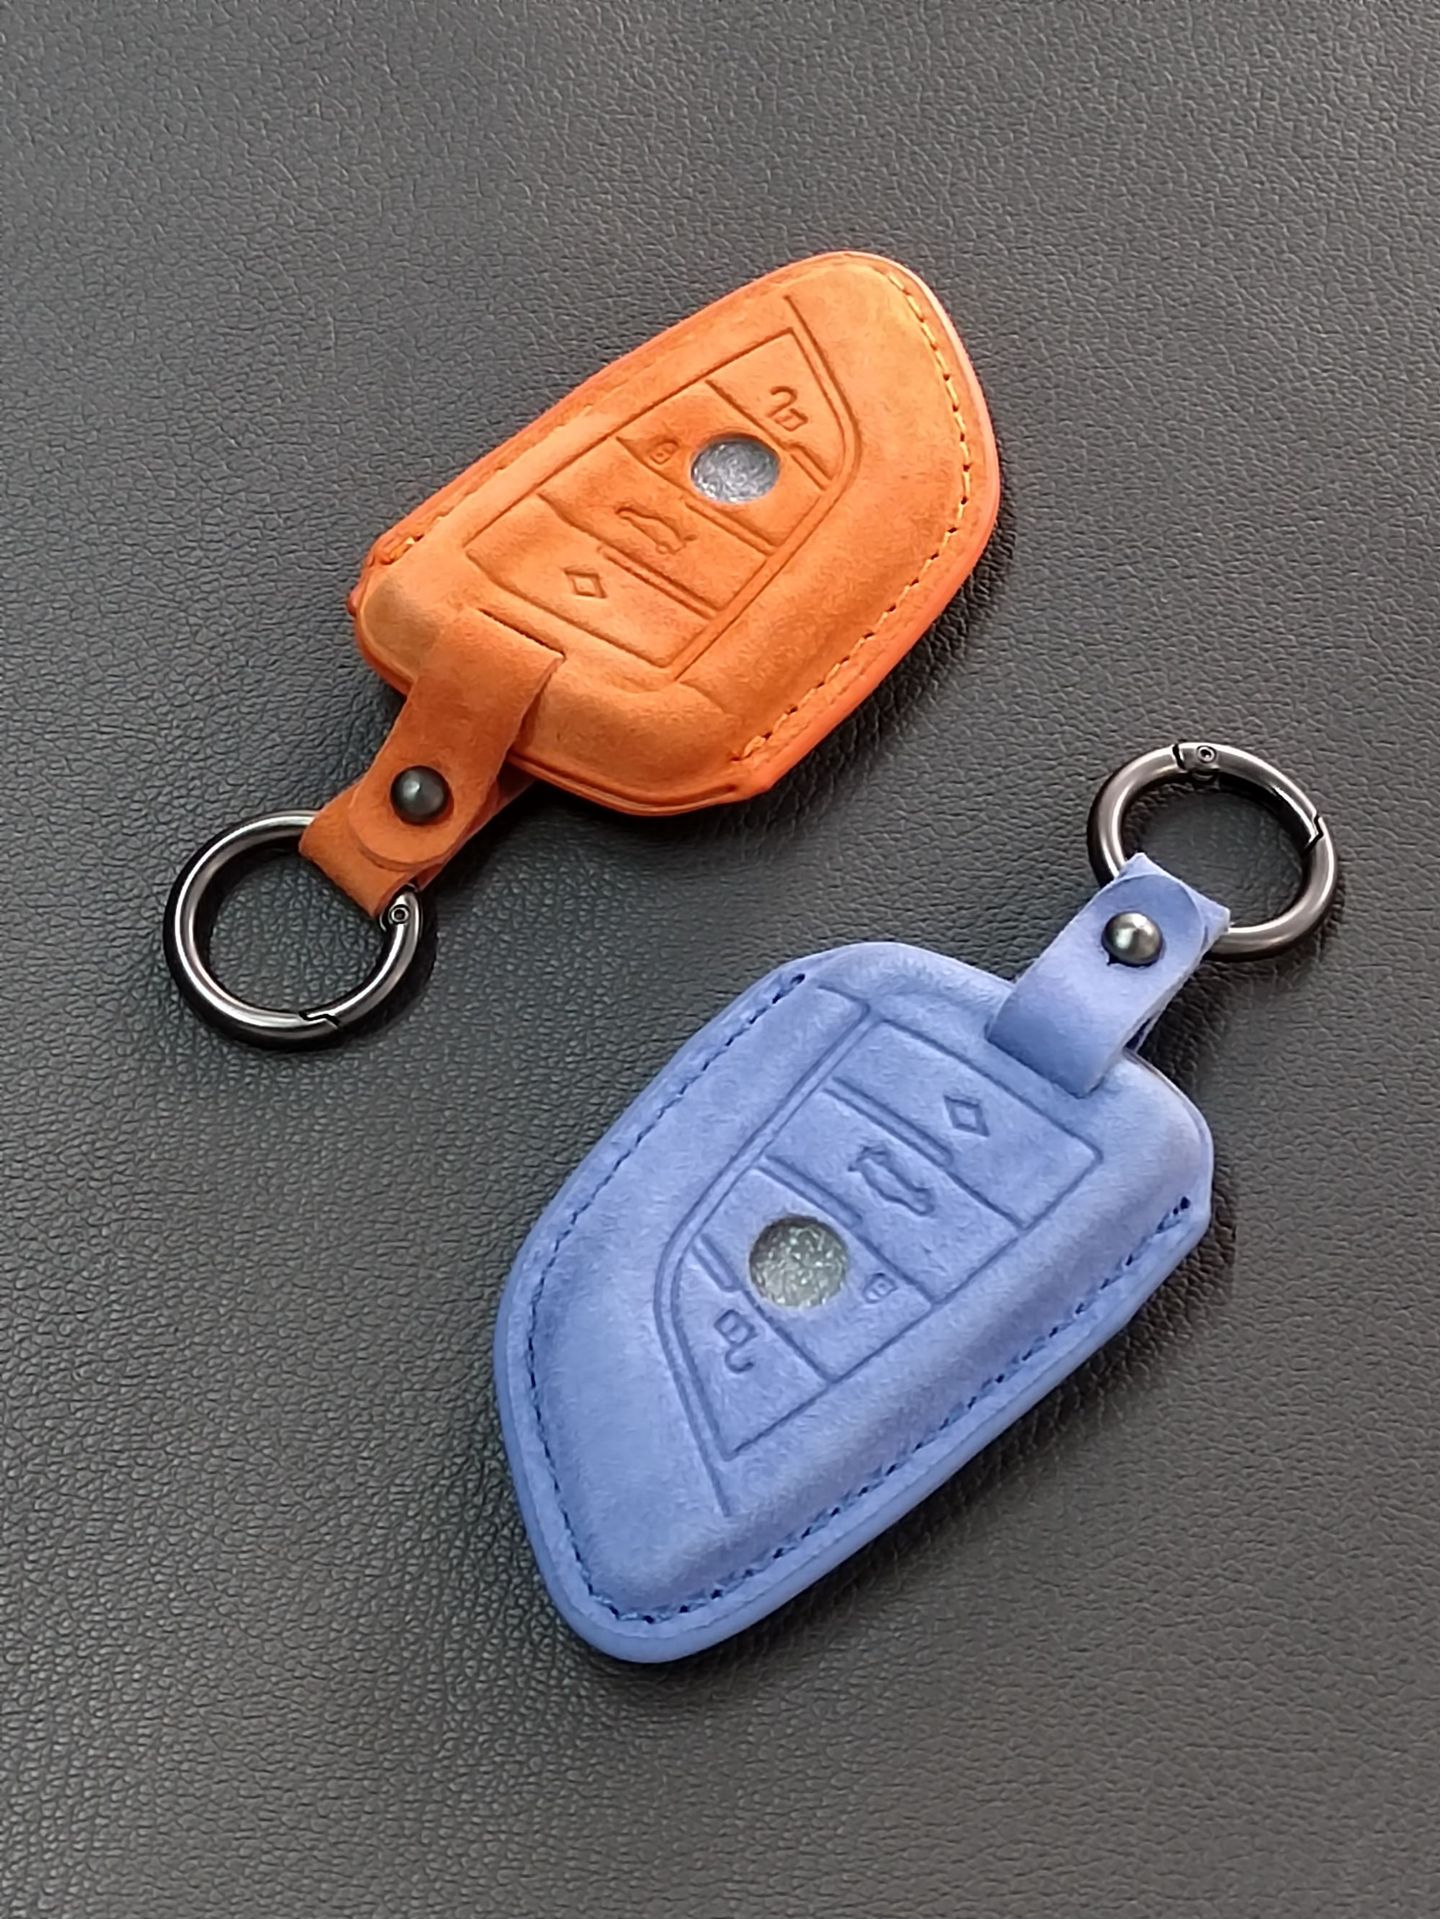 All Inclusive New 5 Series Key Case Suitable for BMW Blade 3D Stereo Car Key Protection Key Case One Piece Shipping